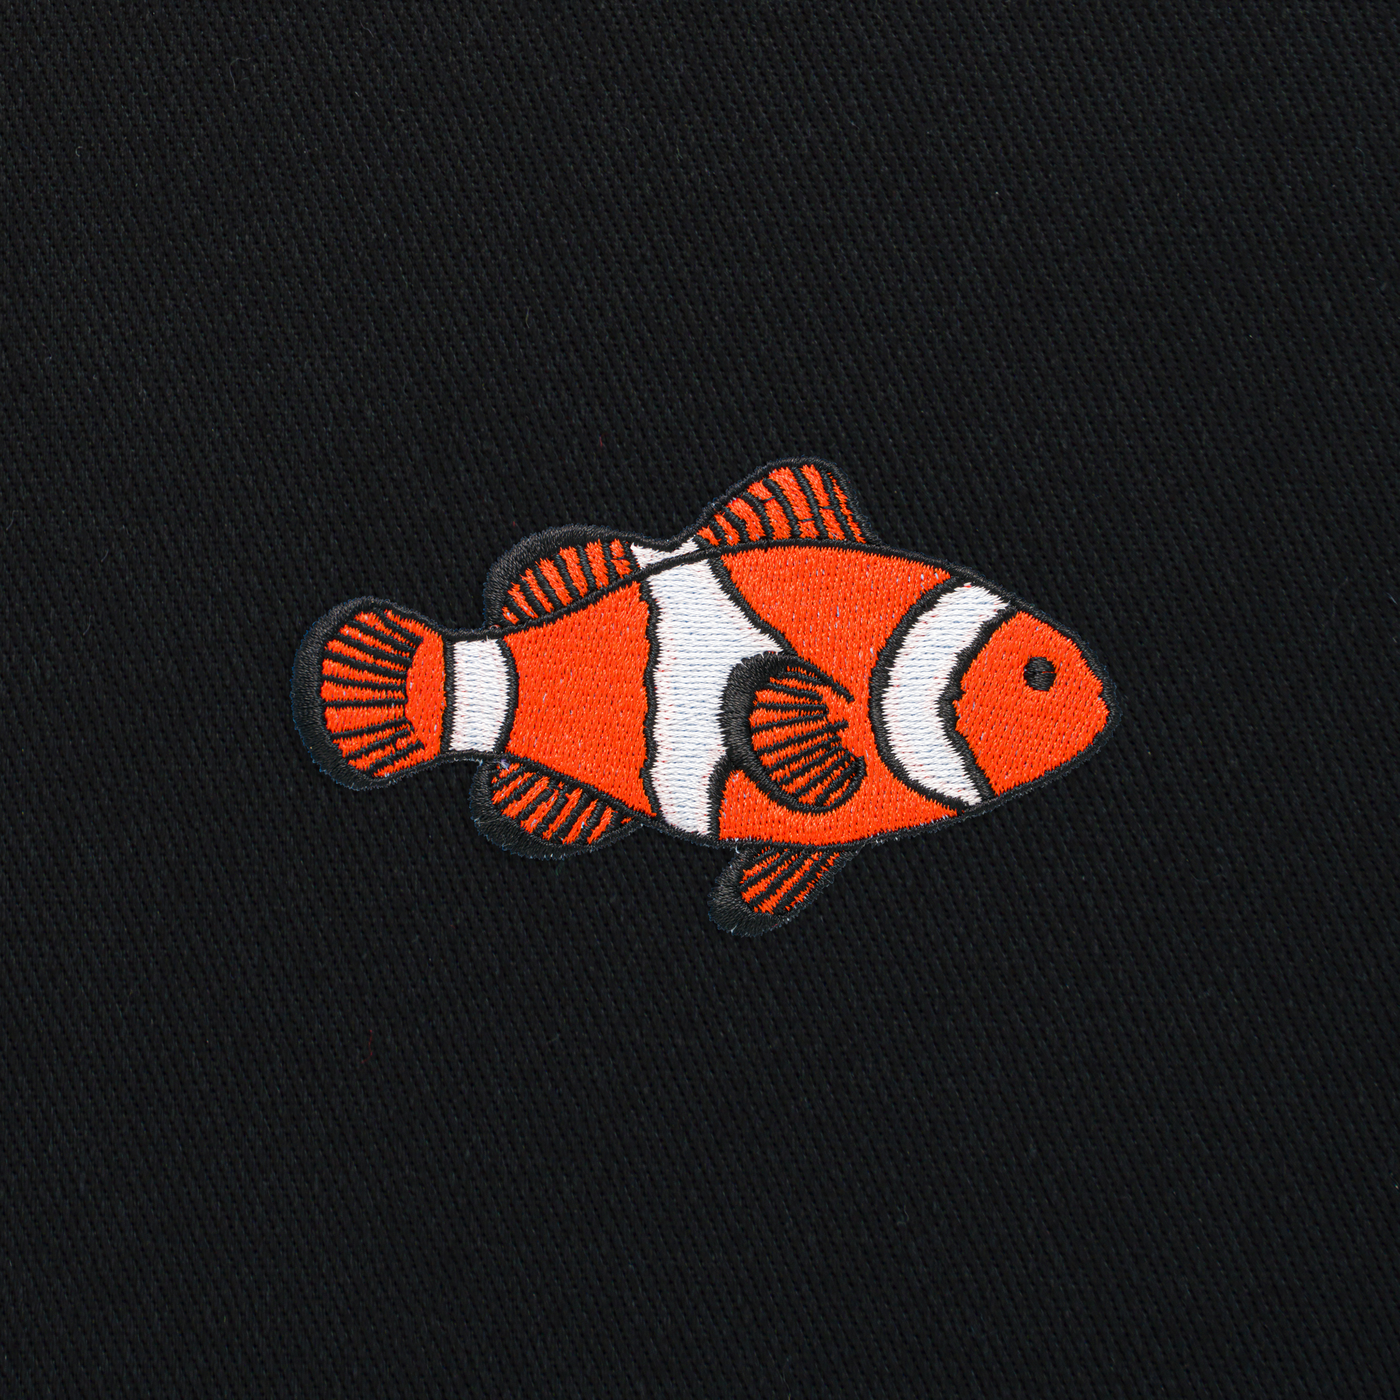 Bobby's Planet Embroidered Clownfish Tote Bag from Seven Seas Fish Animals Collection in Black Color#color_black